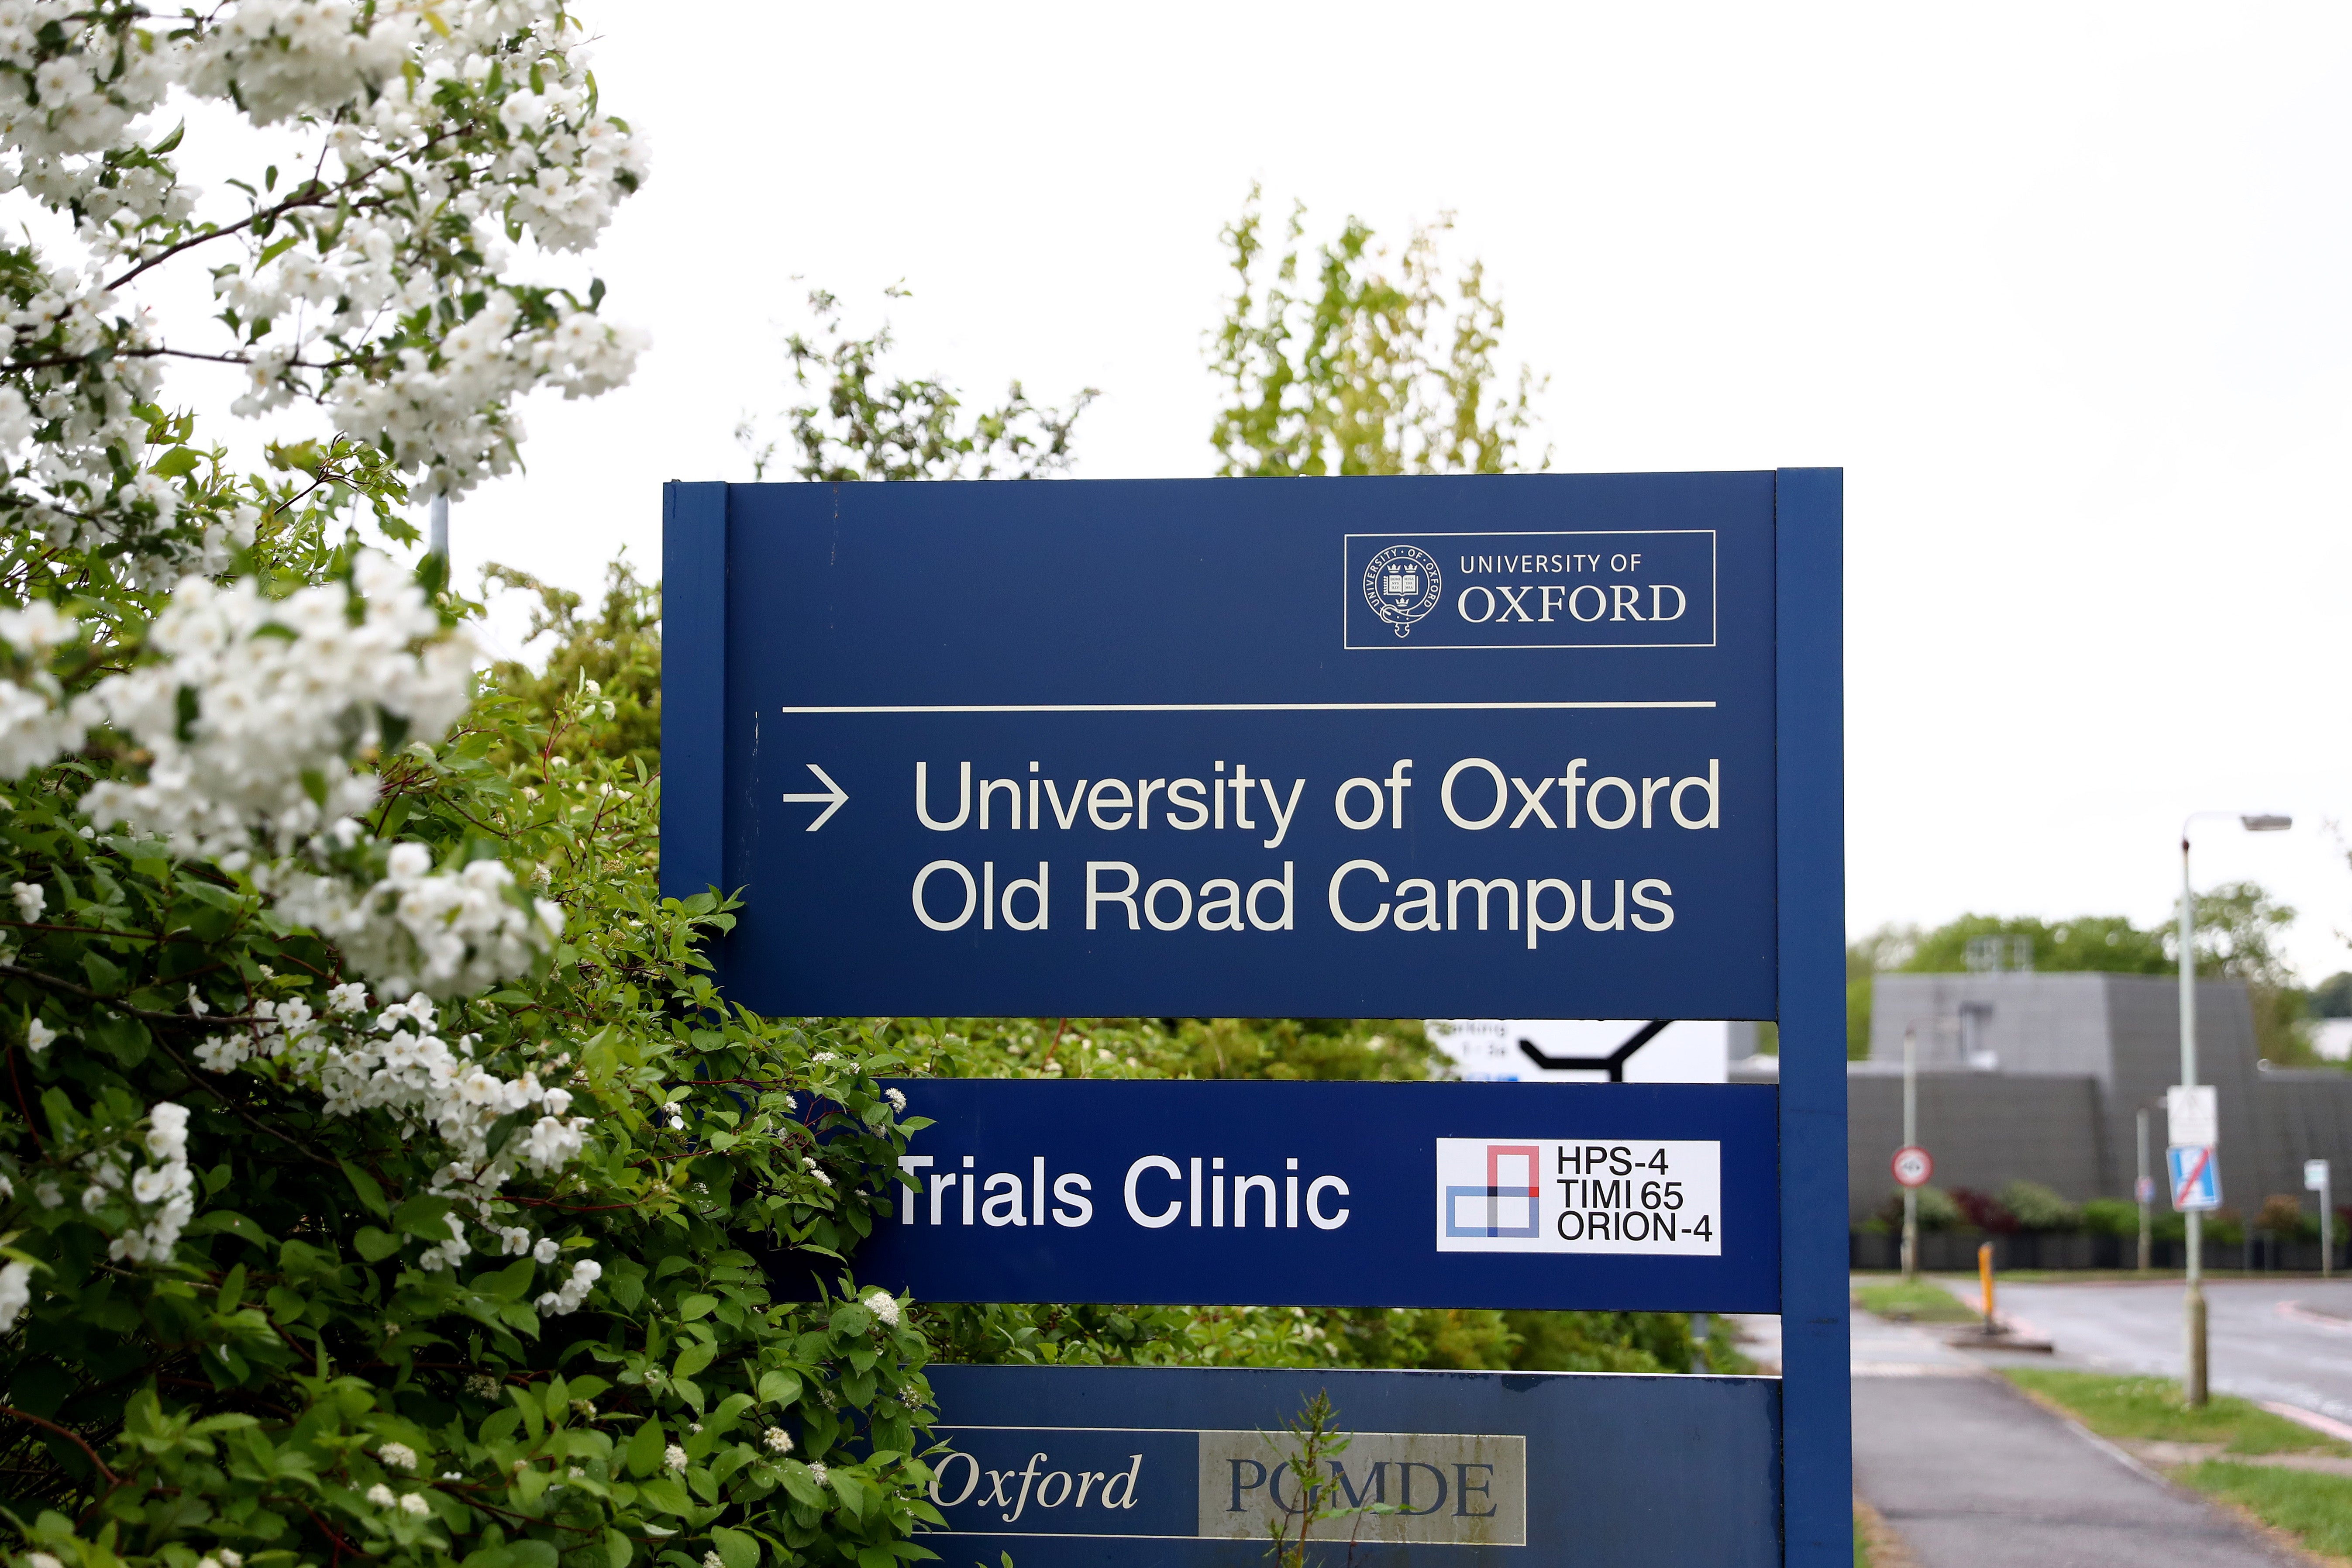 File Image: A general view of a sign outside of the University of Oxford Old Road Campus